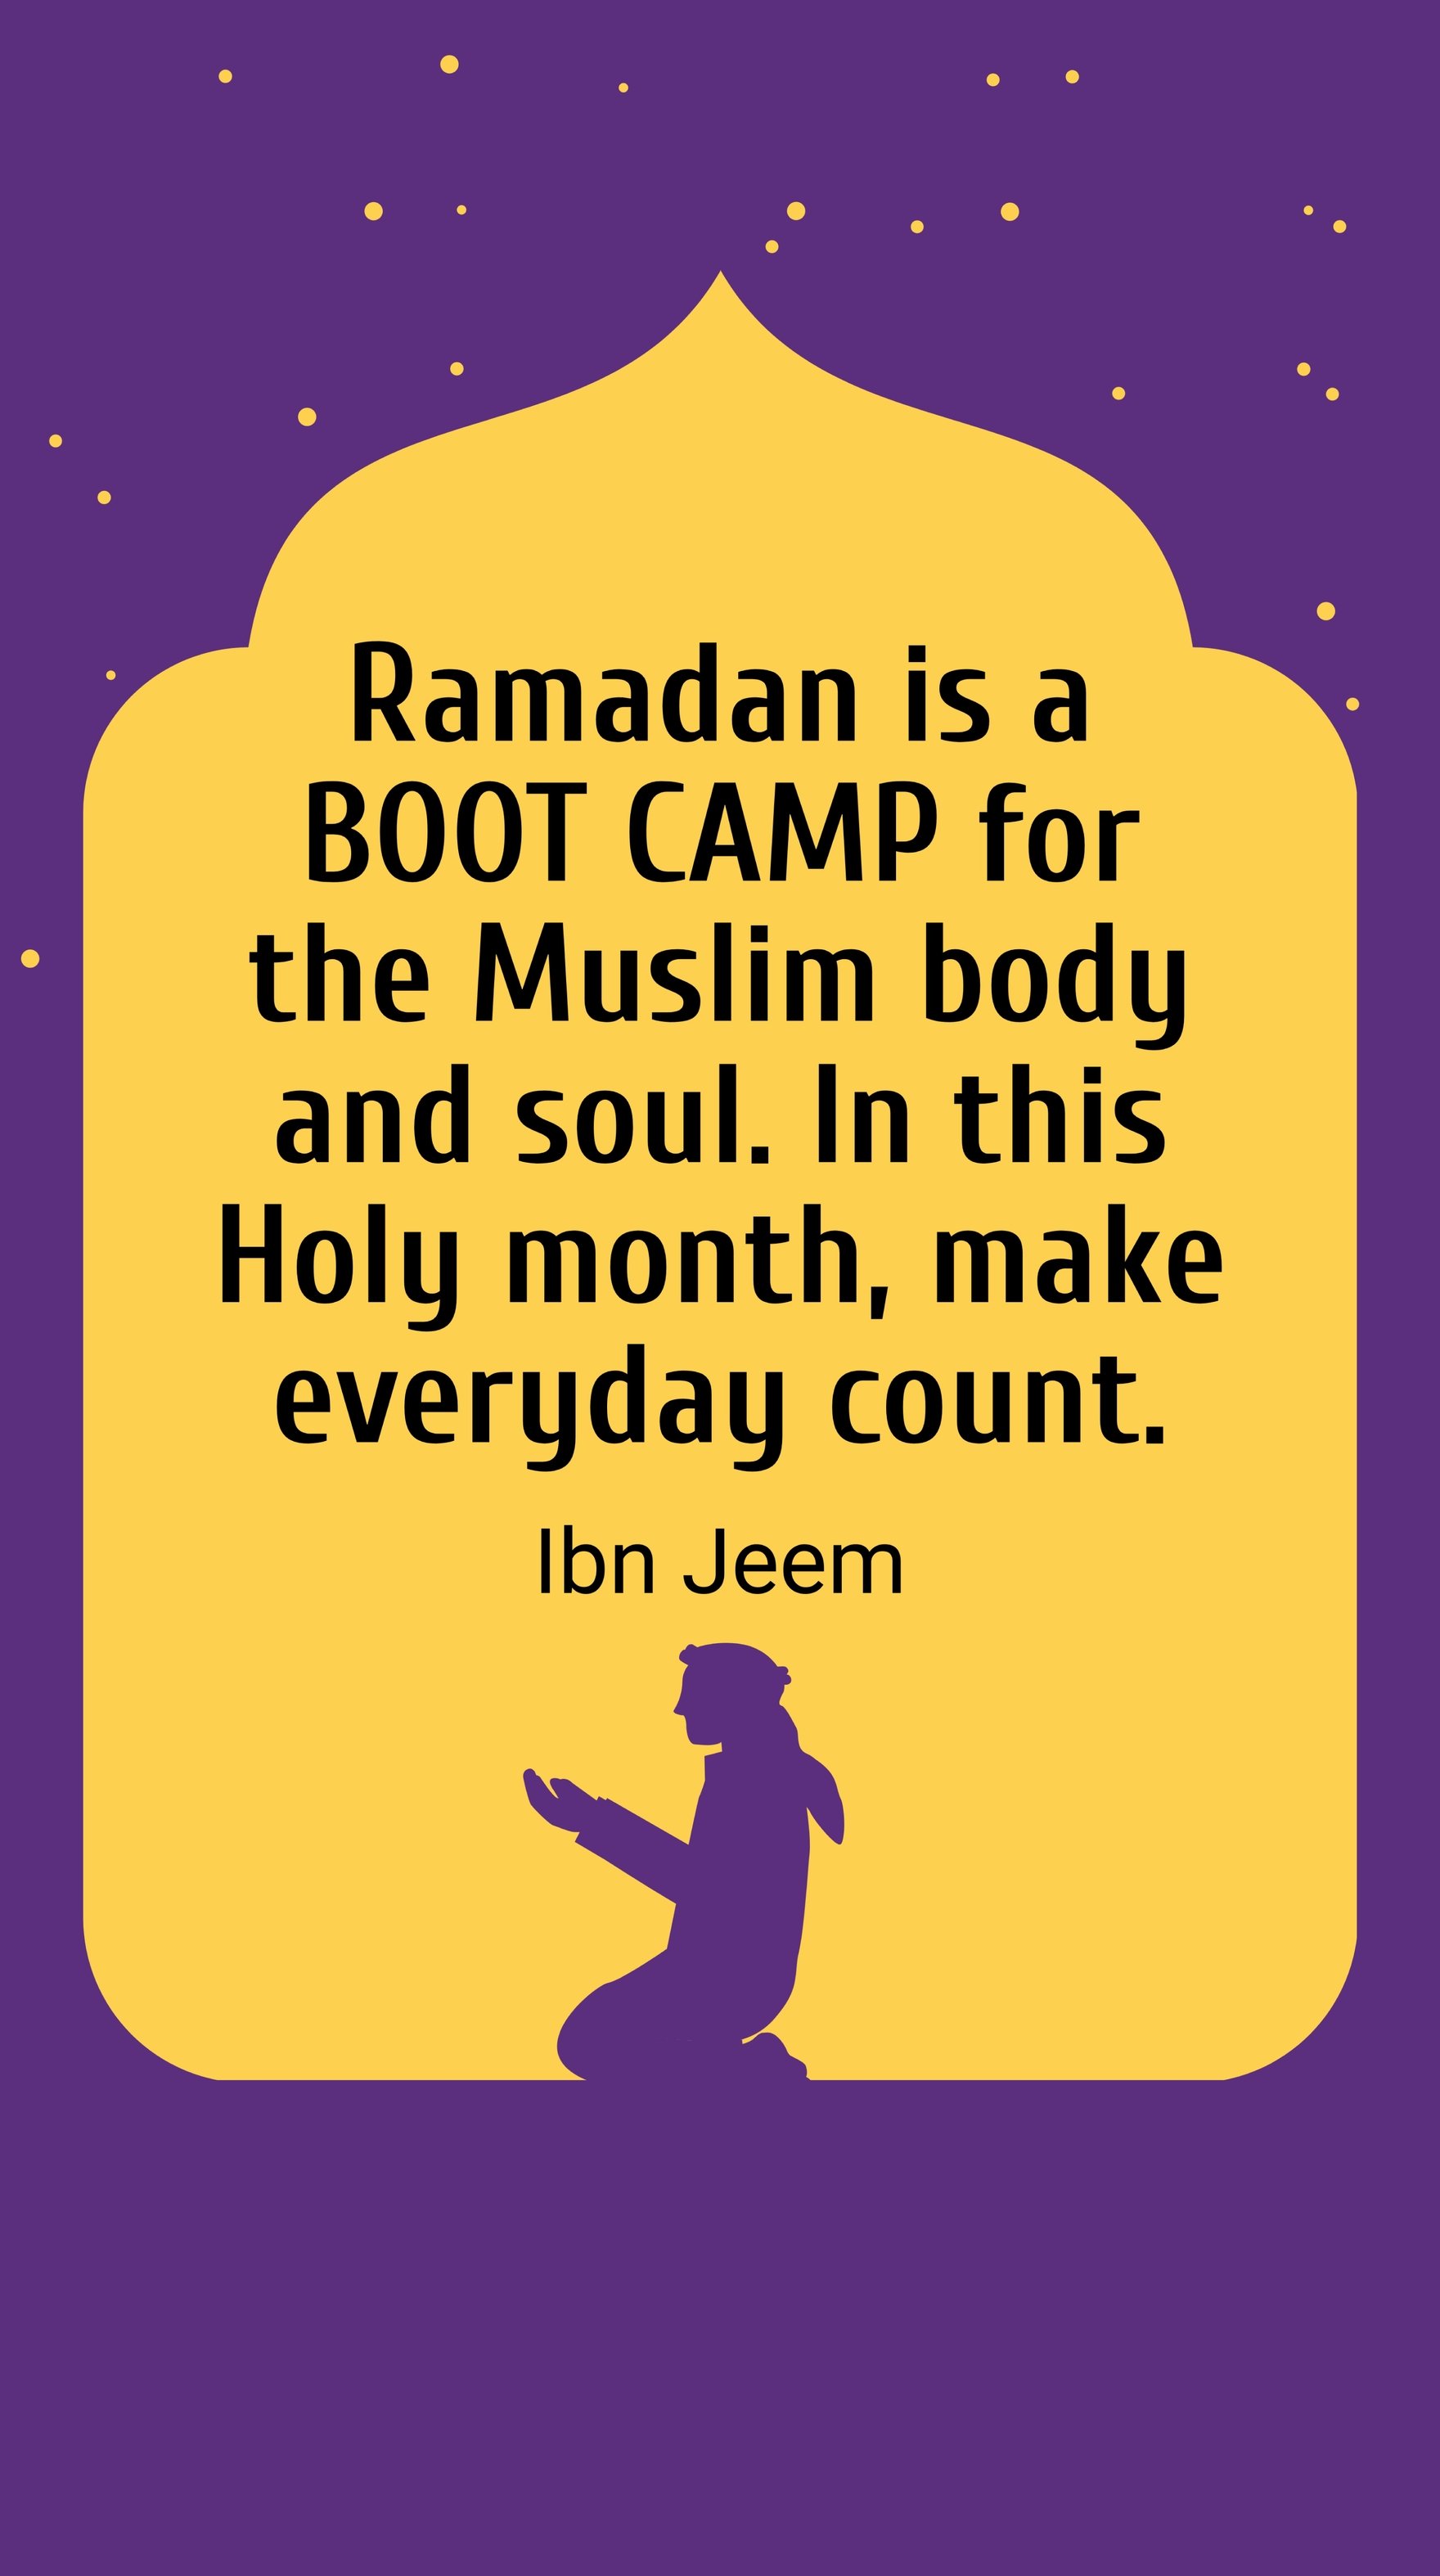 Ibn Jeem - Ramadan is a BOOT CAMP for the Muslim body and soul. In this Holy month, make everyday count.